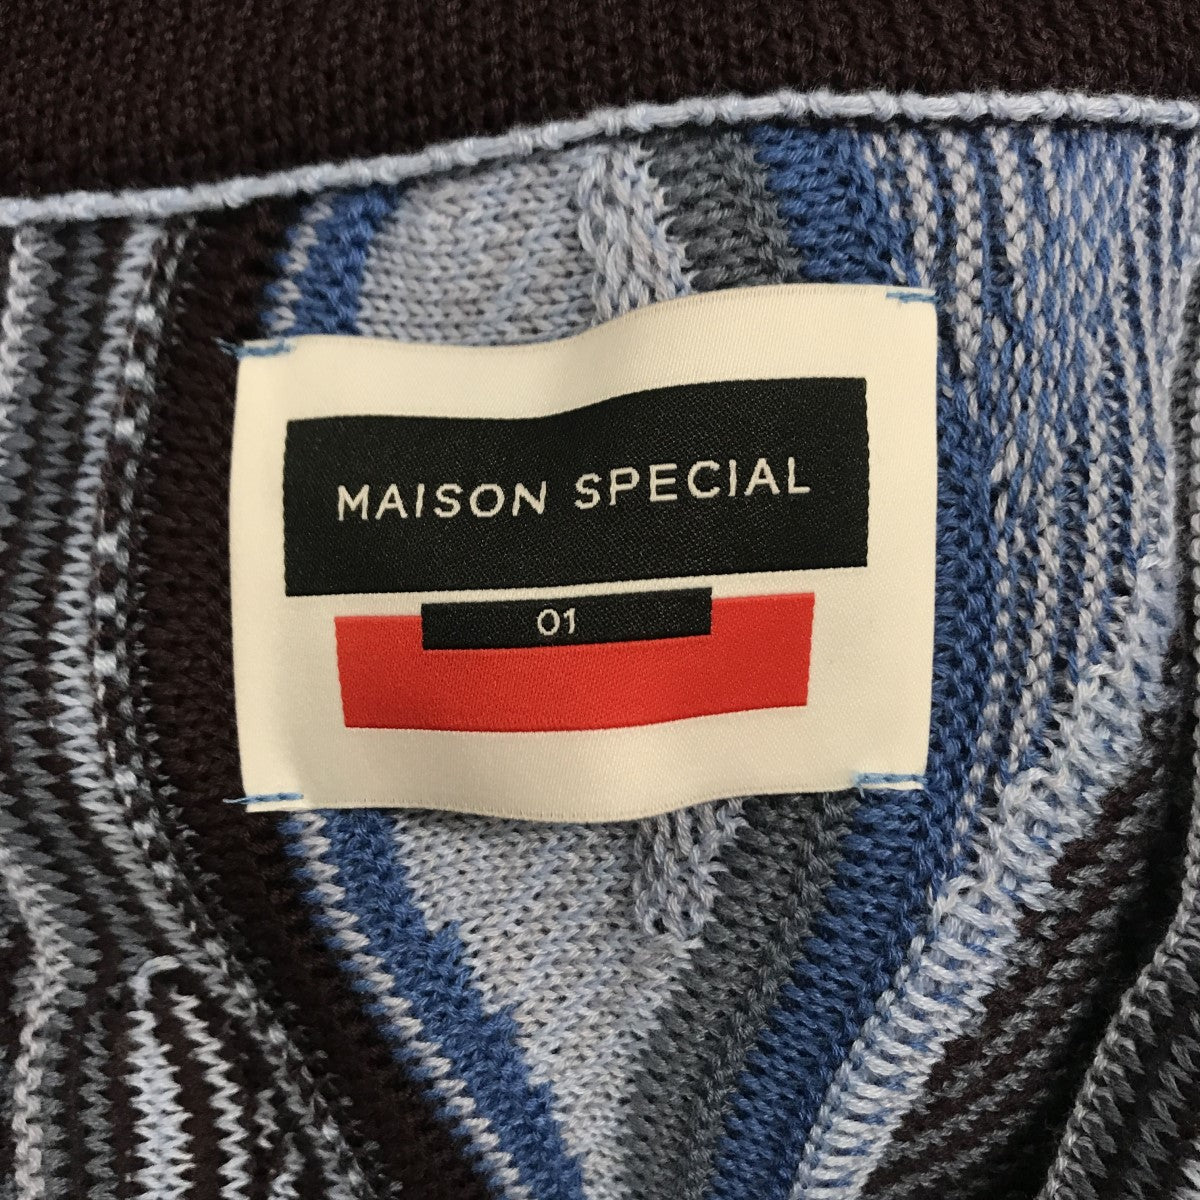 MAISON SPECIAL(メゾンスペシャル) Blister Jacquard Prime-Over 